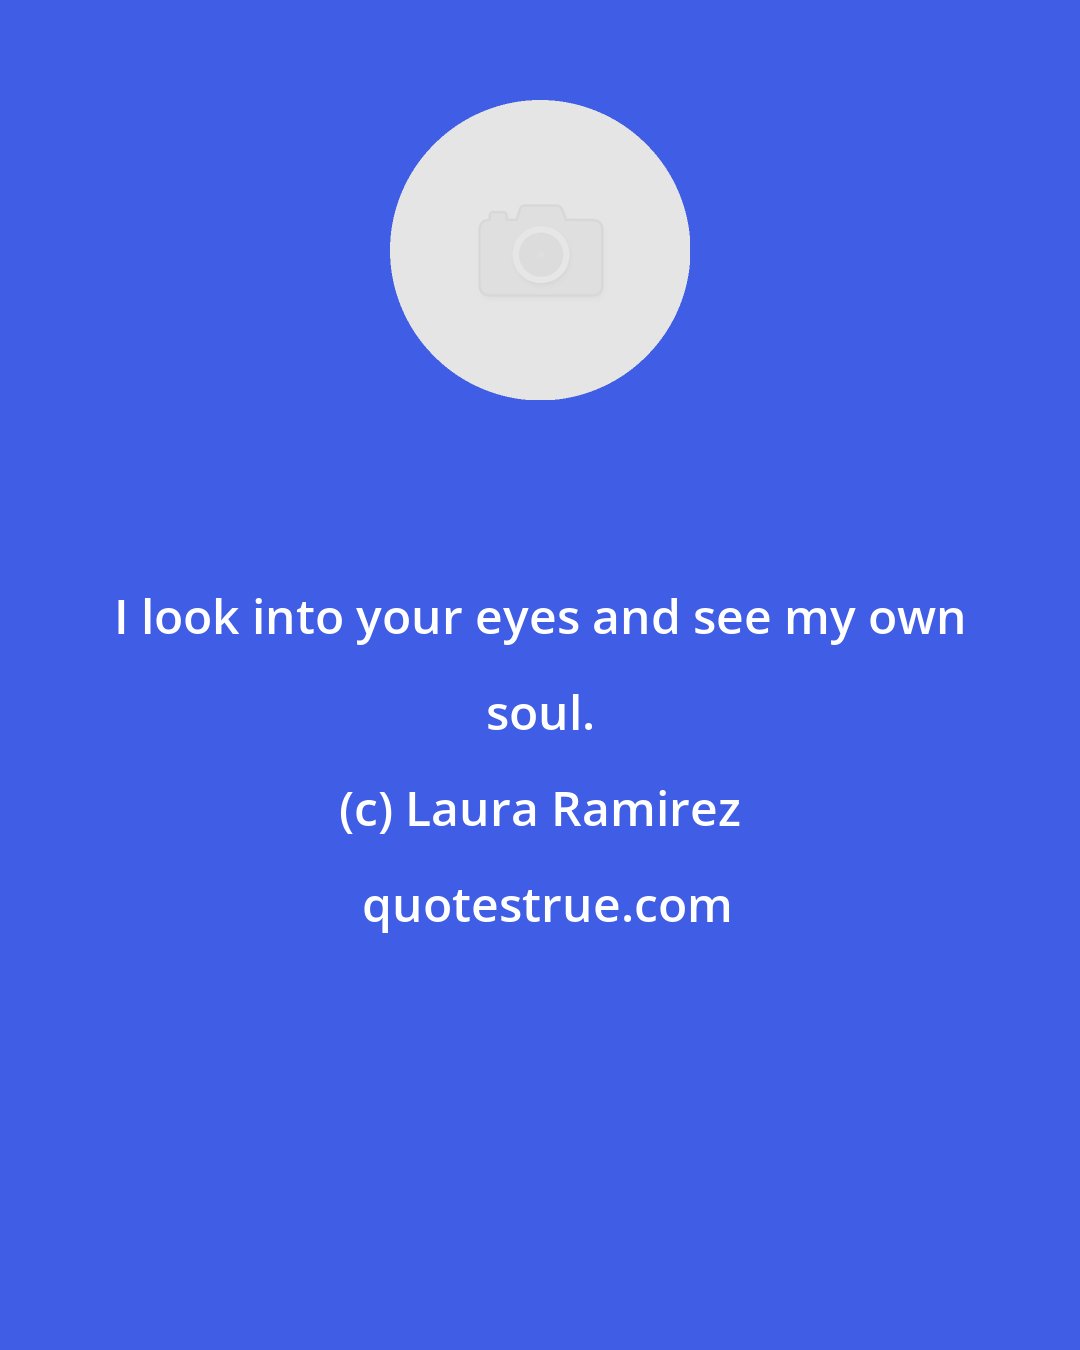 Laura Ramirez: I look into your eyes and see my own soul.